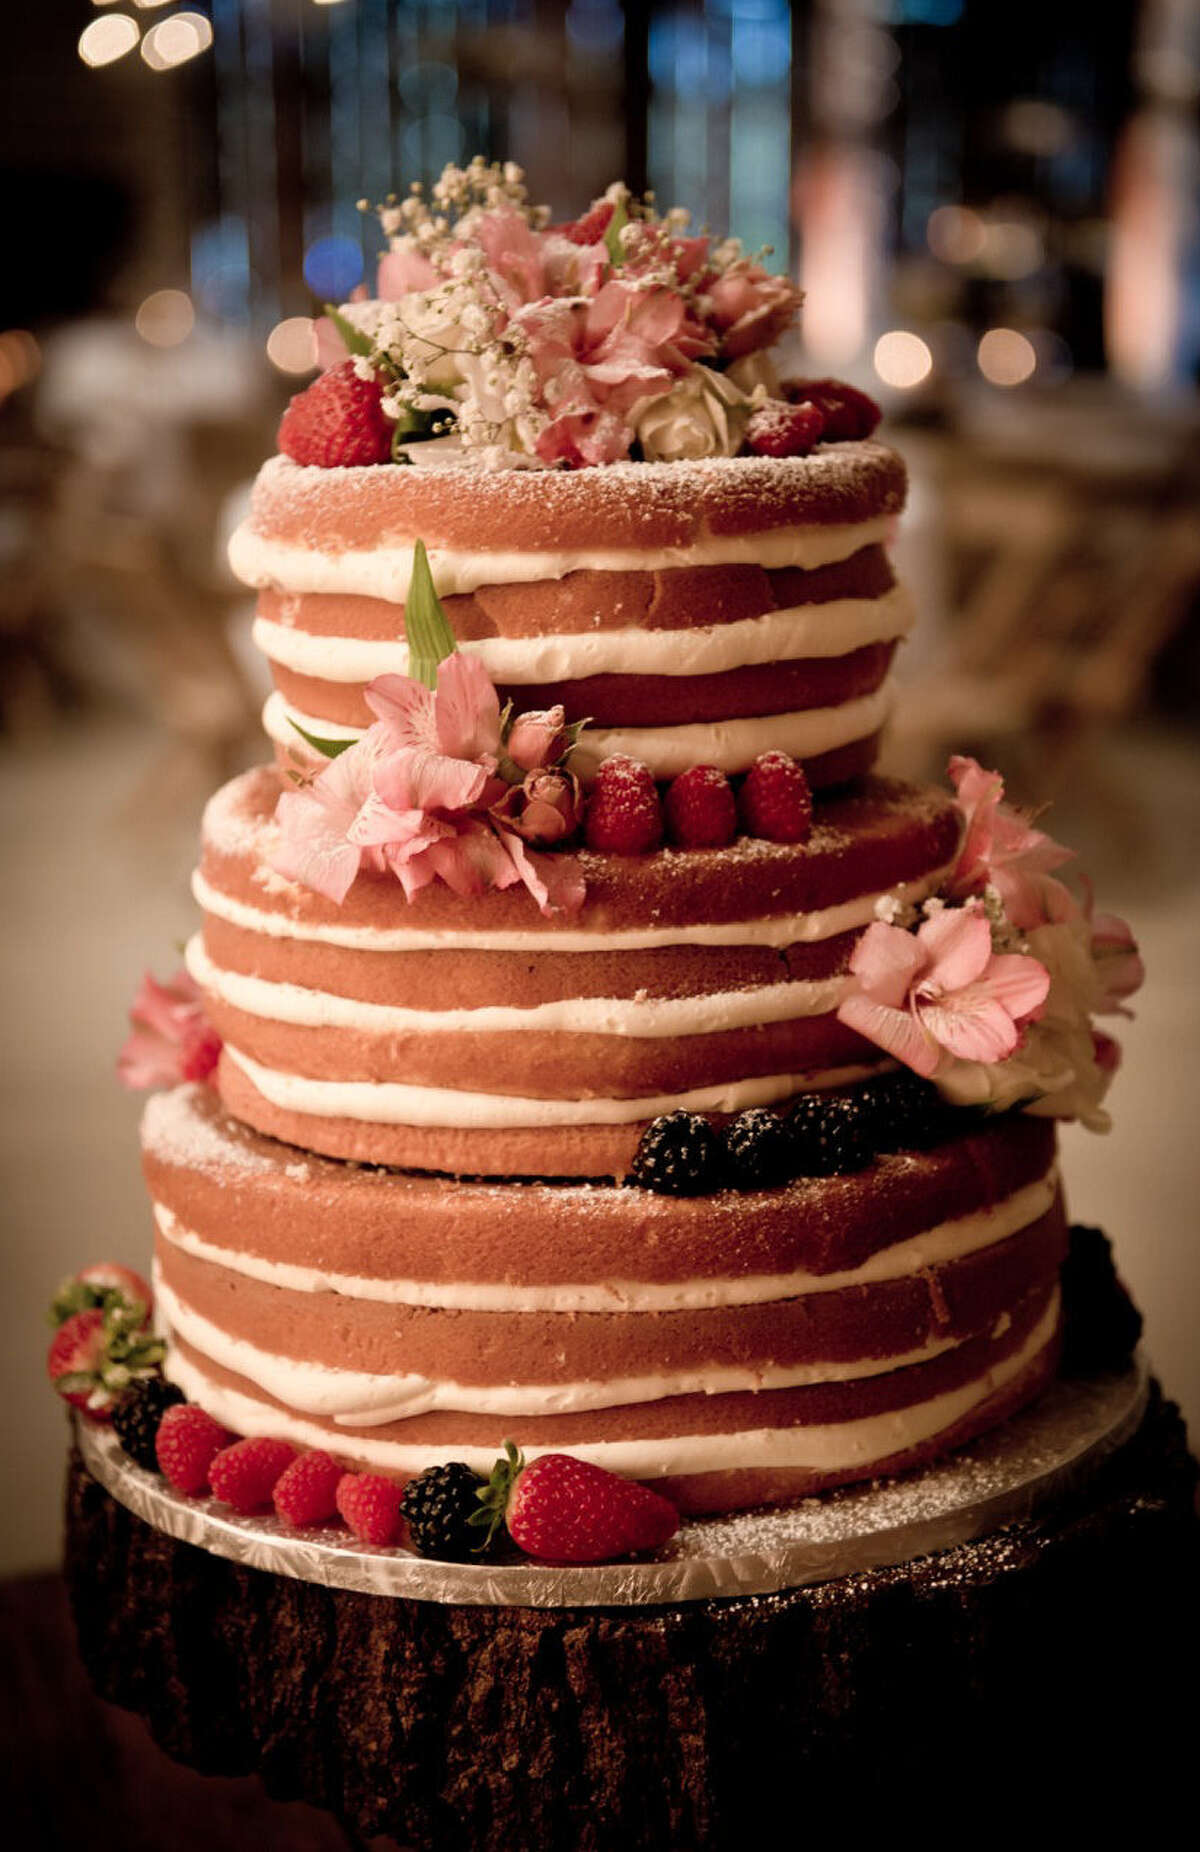 Don Strange of Texas Inc. is finding that naked wedding cakes — with frosting between layers but not on the sides — are popular.